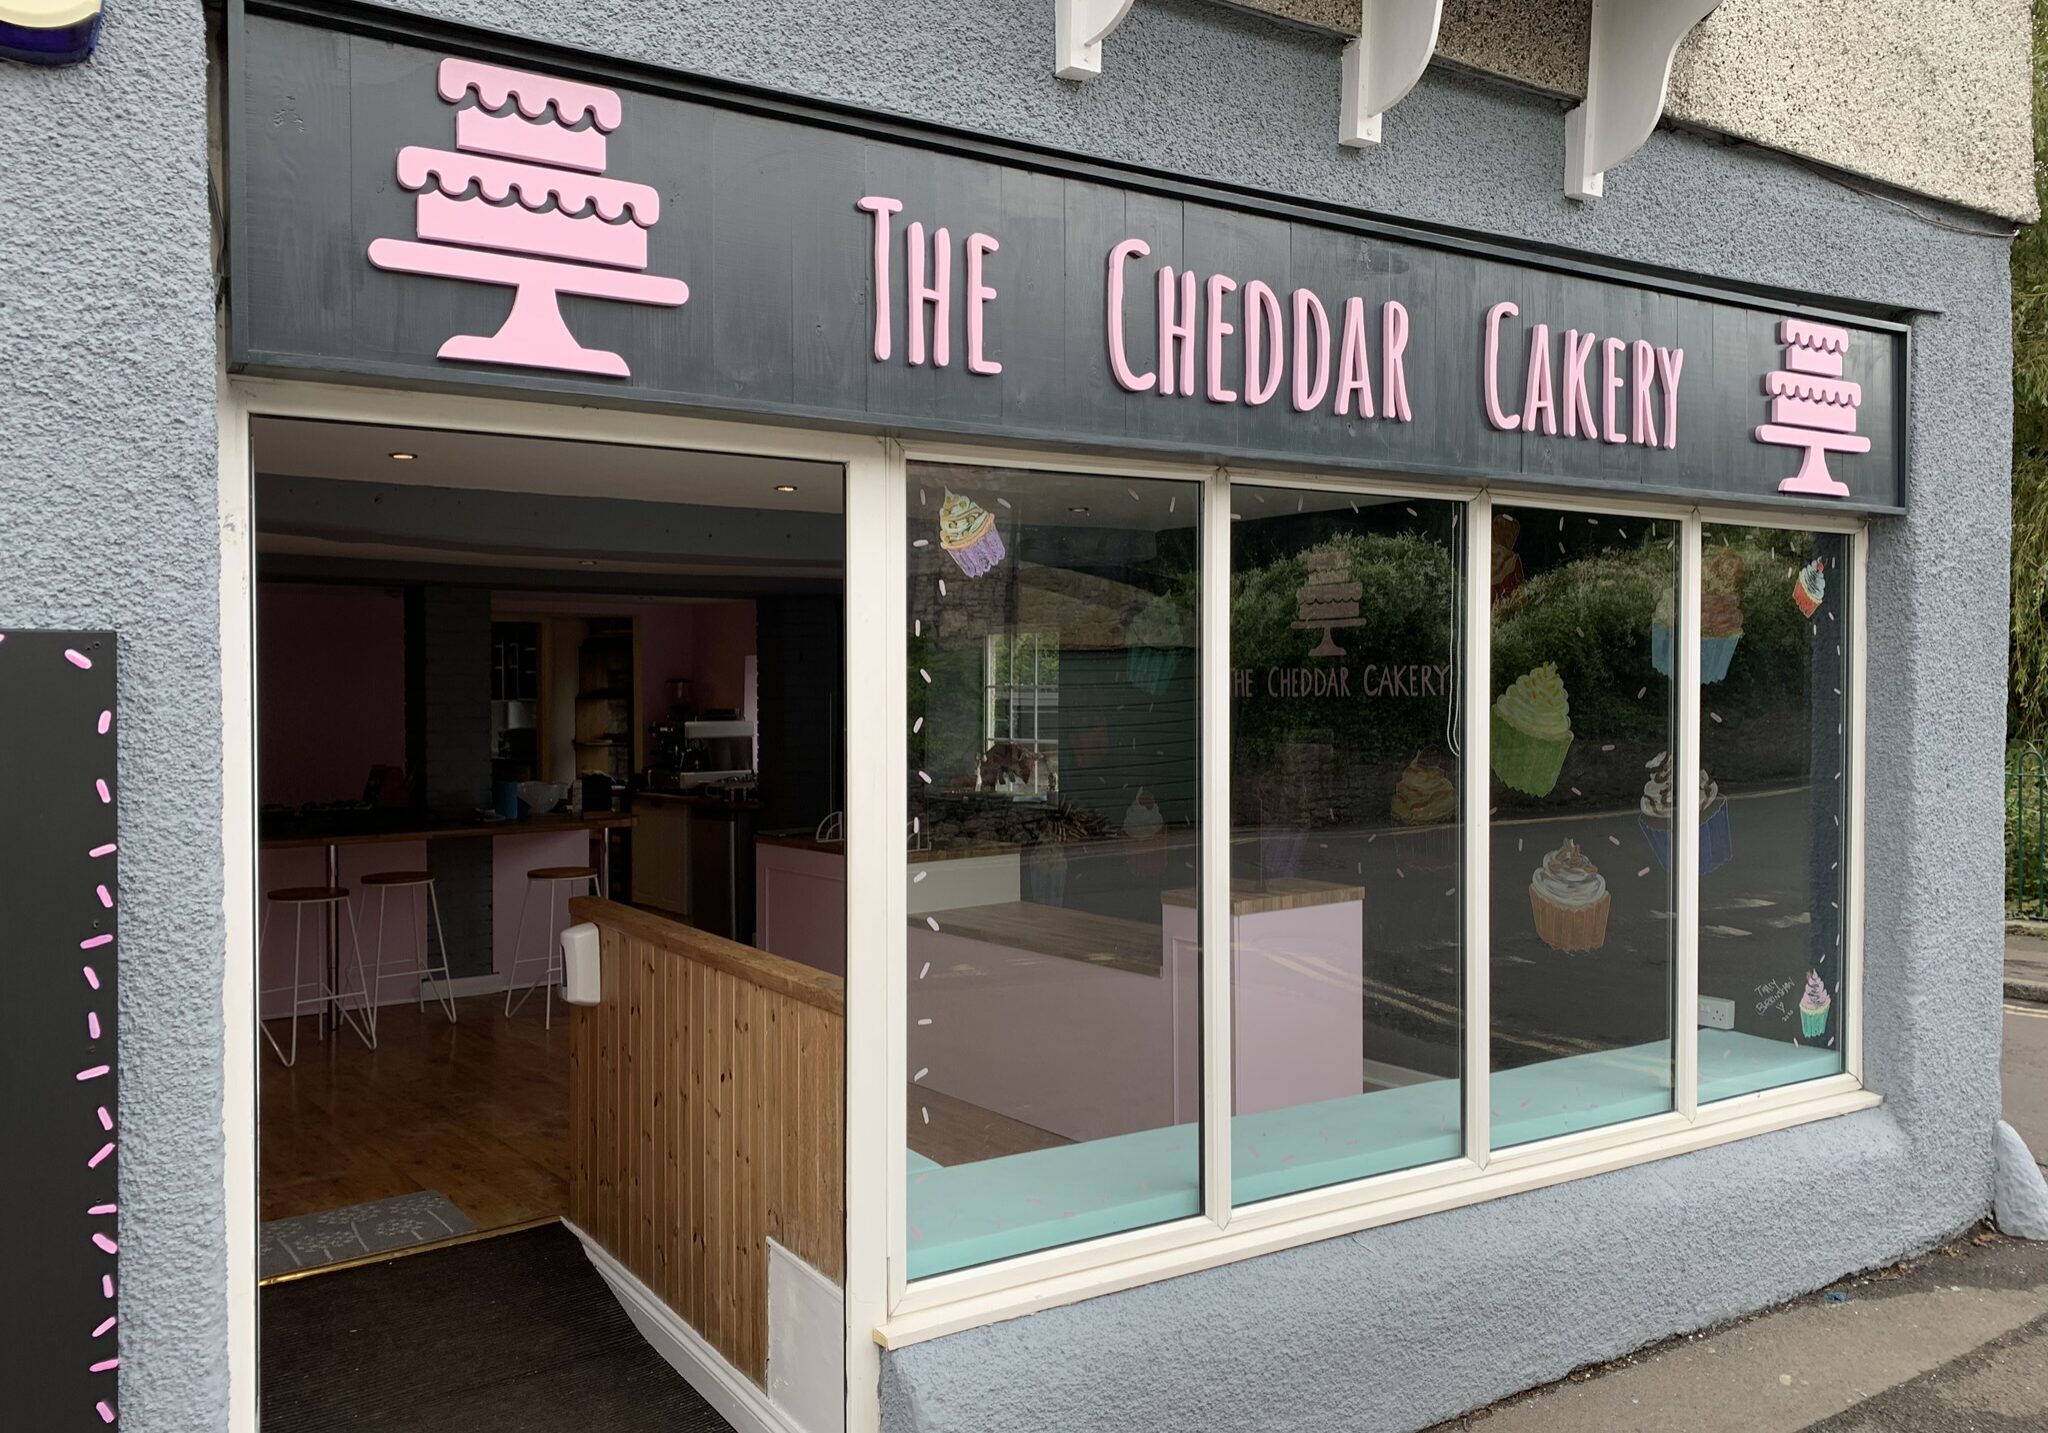 The Cheddar Cakery